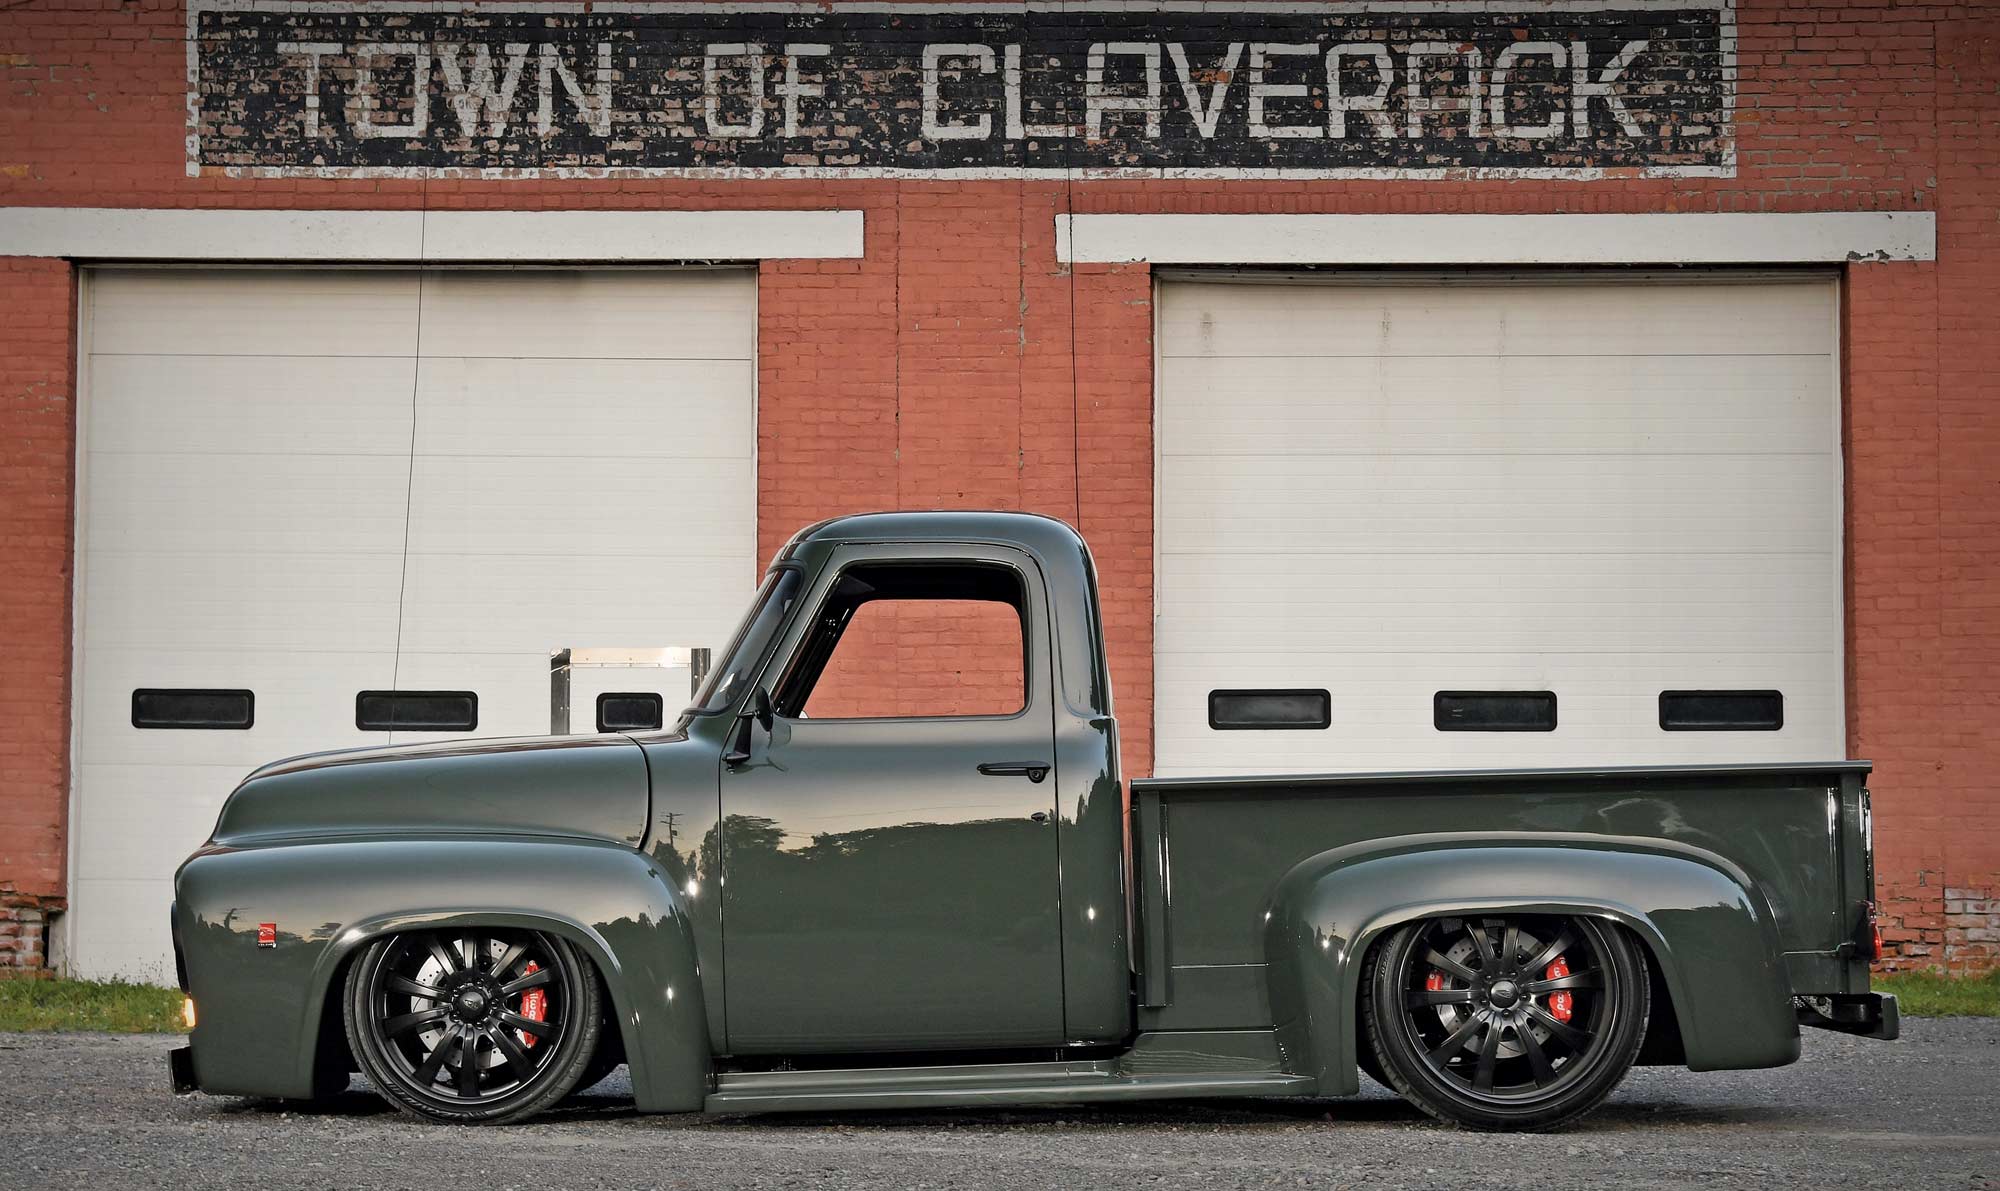 Side view of Dark green ’54 F-100 pickup truck parked in front of brick wall with painted sign reading Town of Claverack